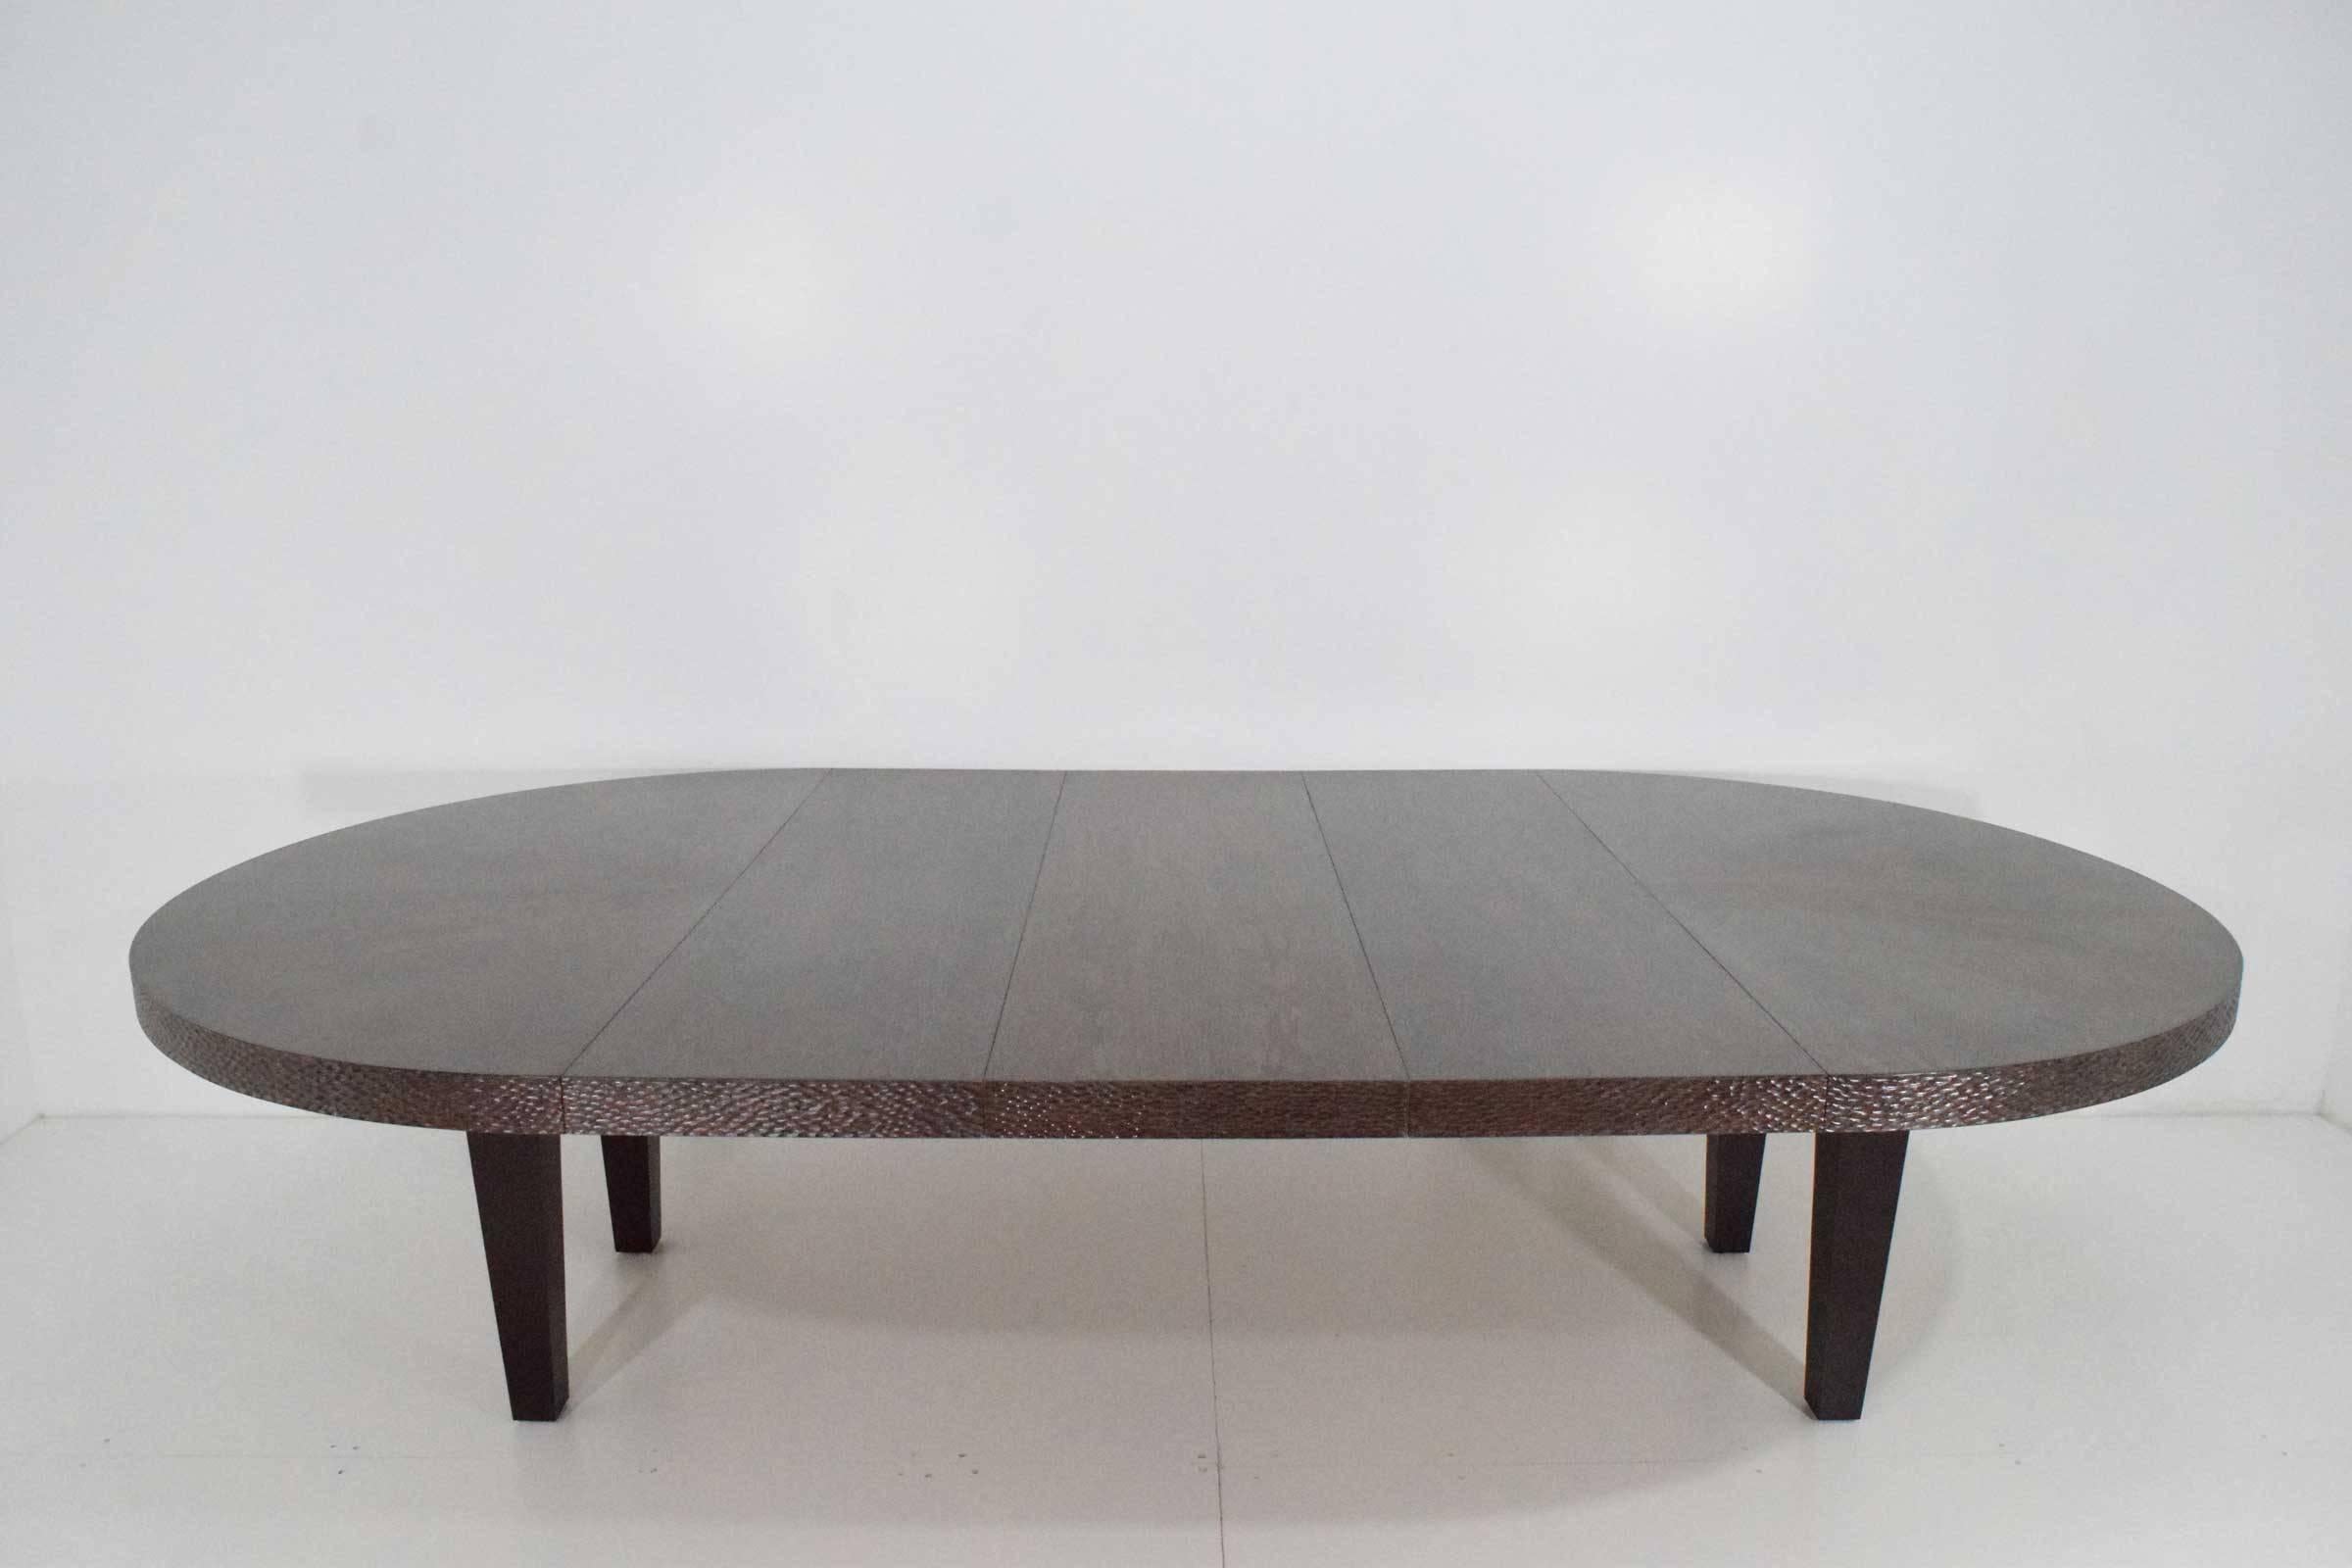 Beautiful dining table by Berman Rosseti, scalloped sides, cerused oak. Table has three leaves to adjust as needed. Is a 66' diameter table without the leaves.